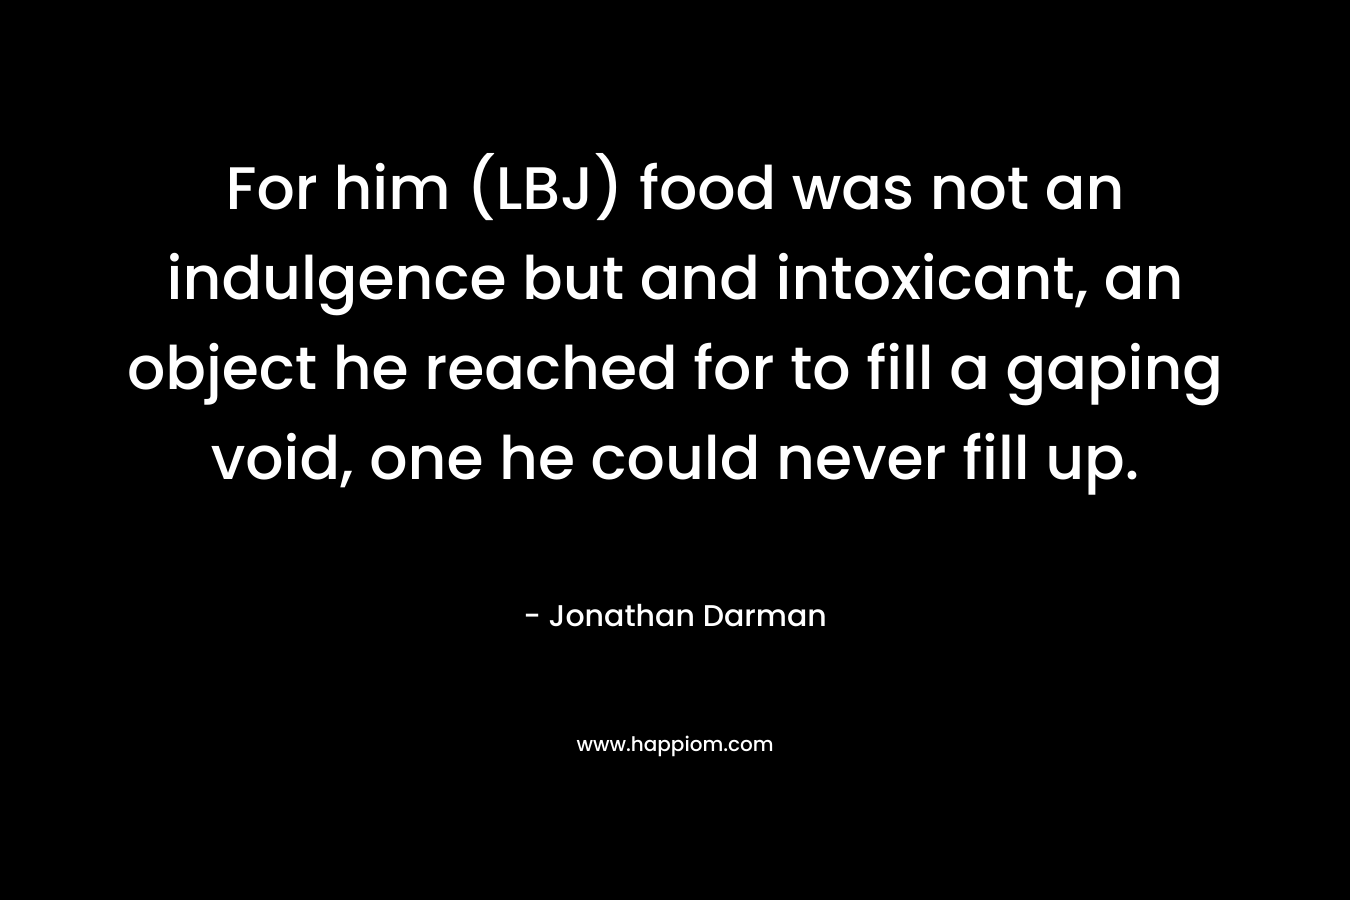 For him (LBJ) food was not an indulgence but and intoxicant, an object he reached for to fill a gaping void, one he could never fill up. – Jonathan Darman